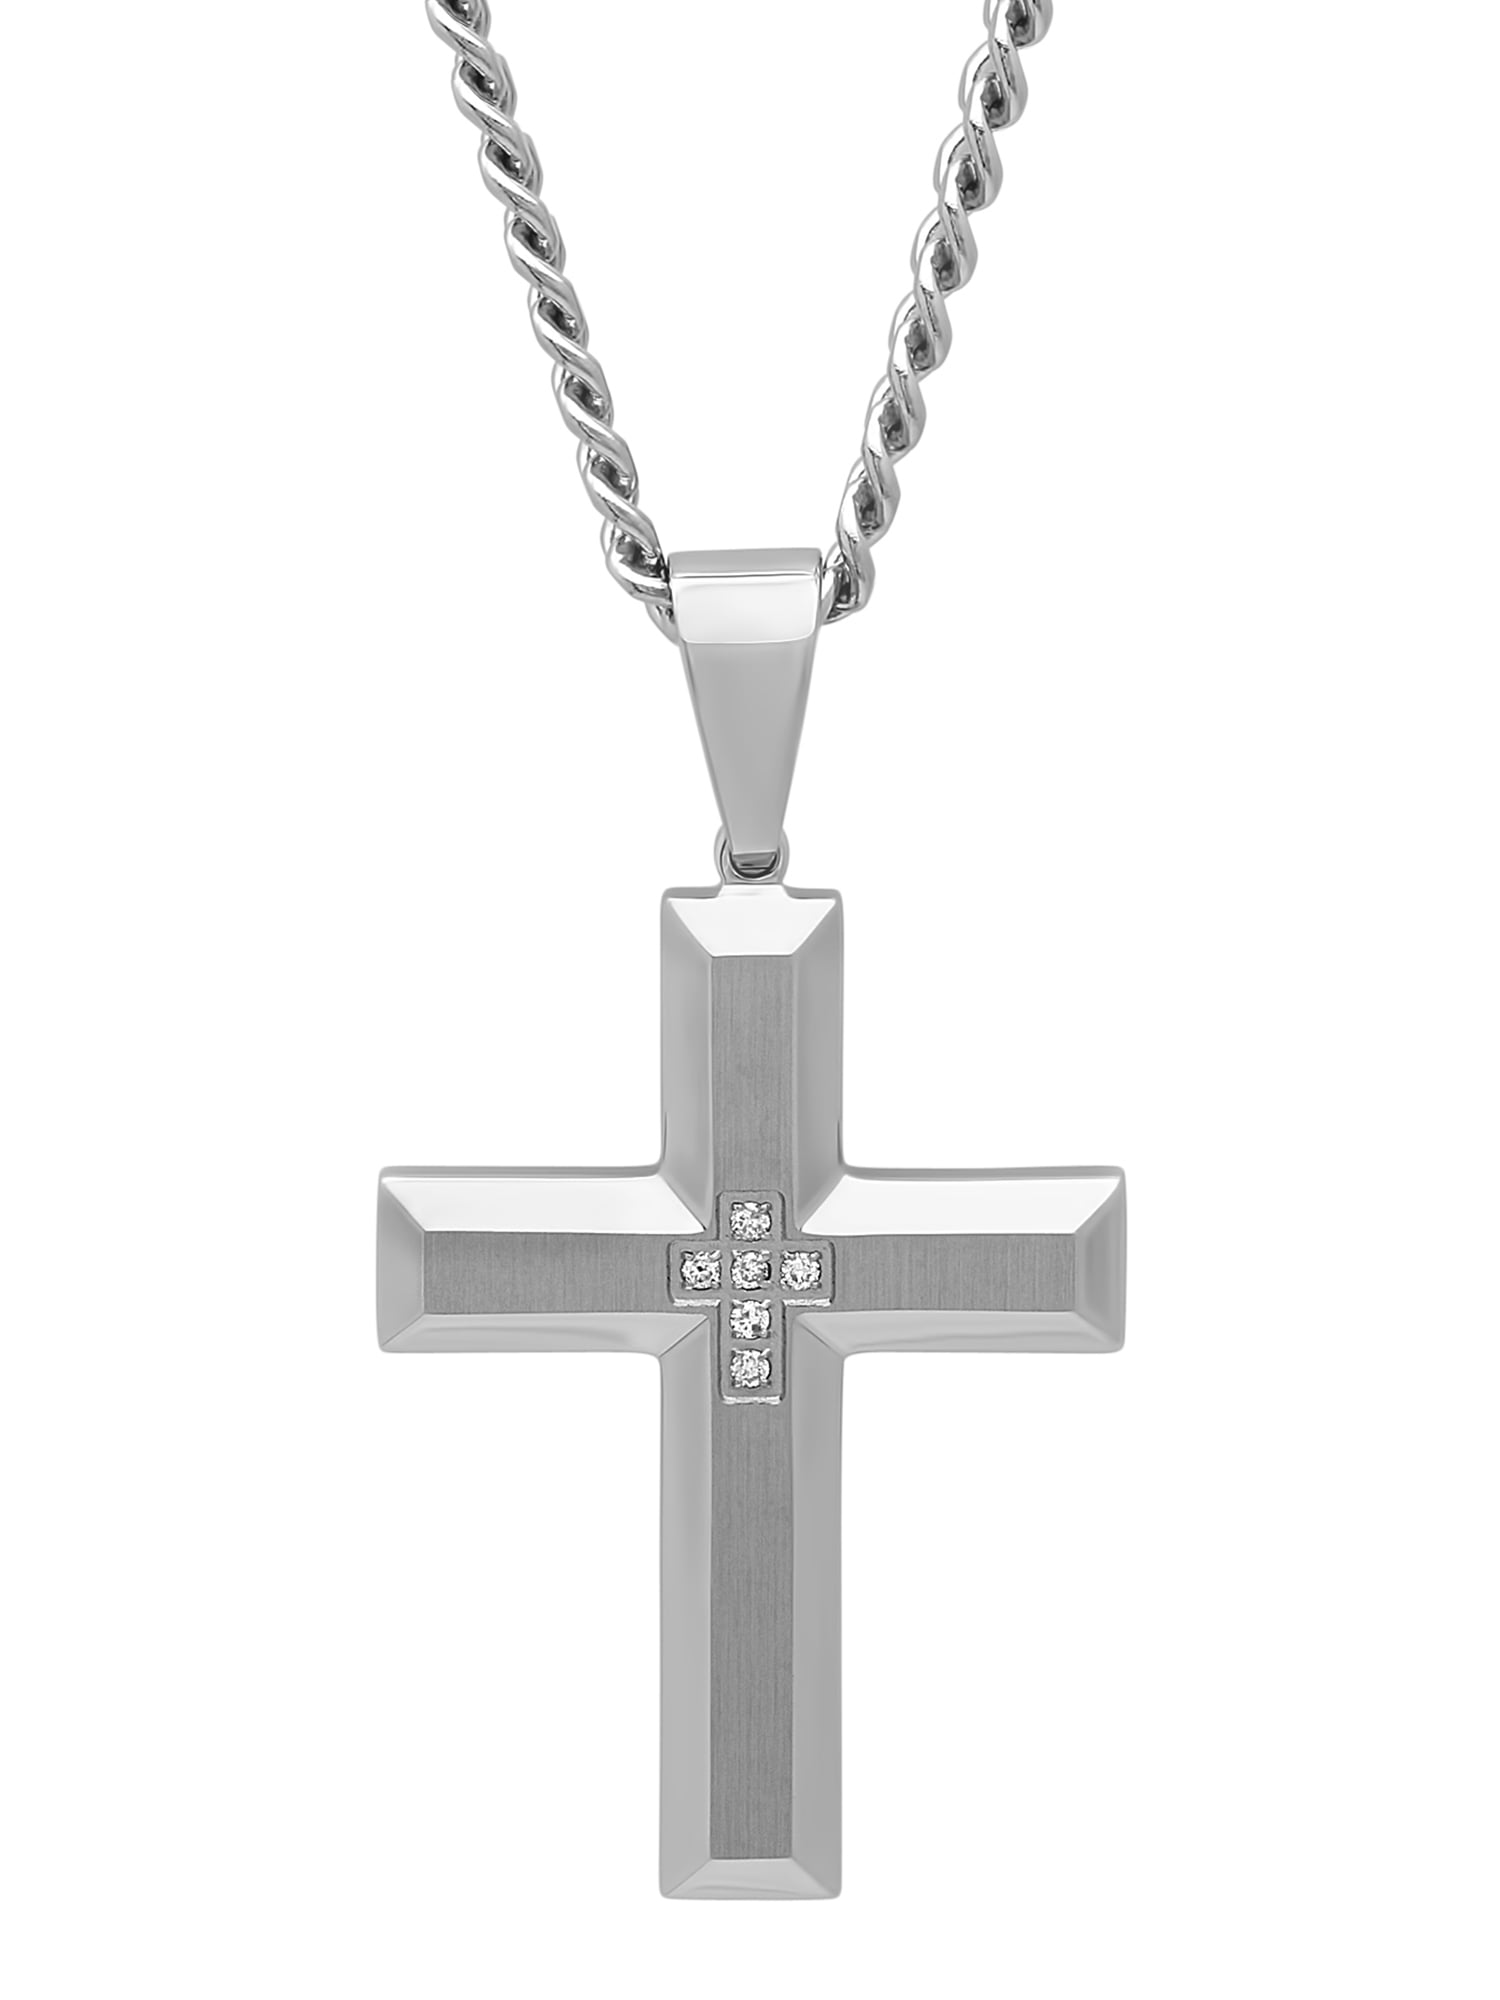 Charm Unisex Silver Steel Stainless Cross Pendant Leather Chain Necklace Jewelry 